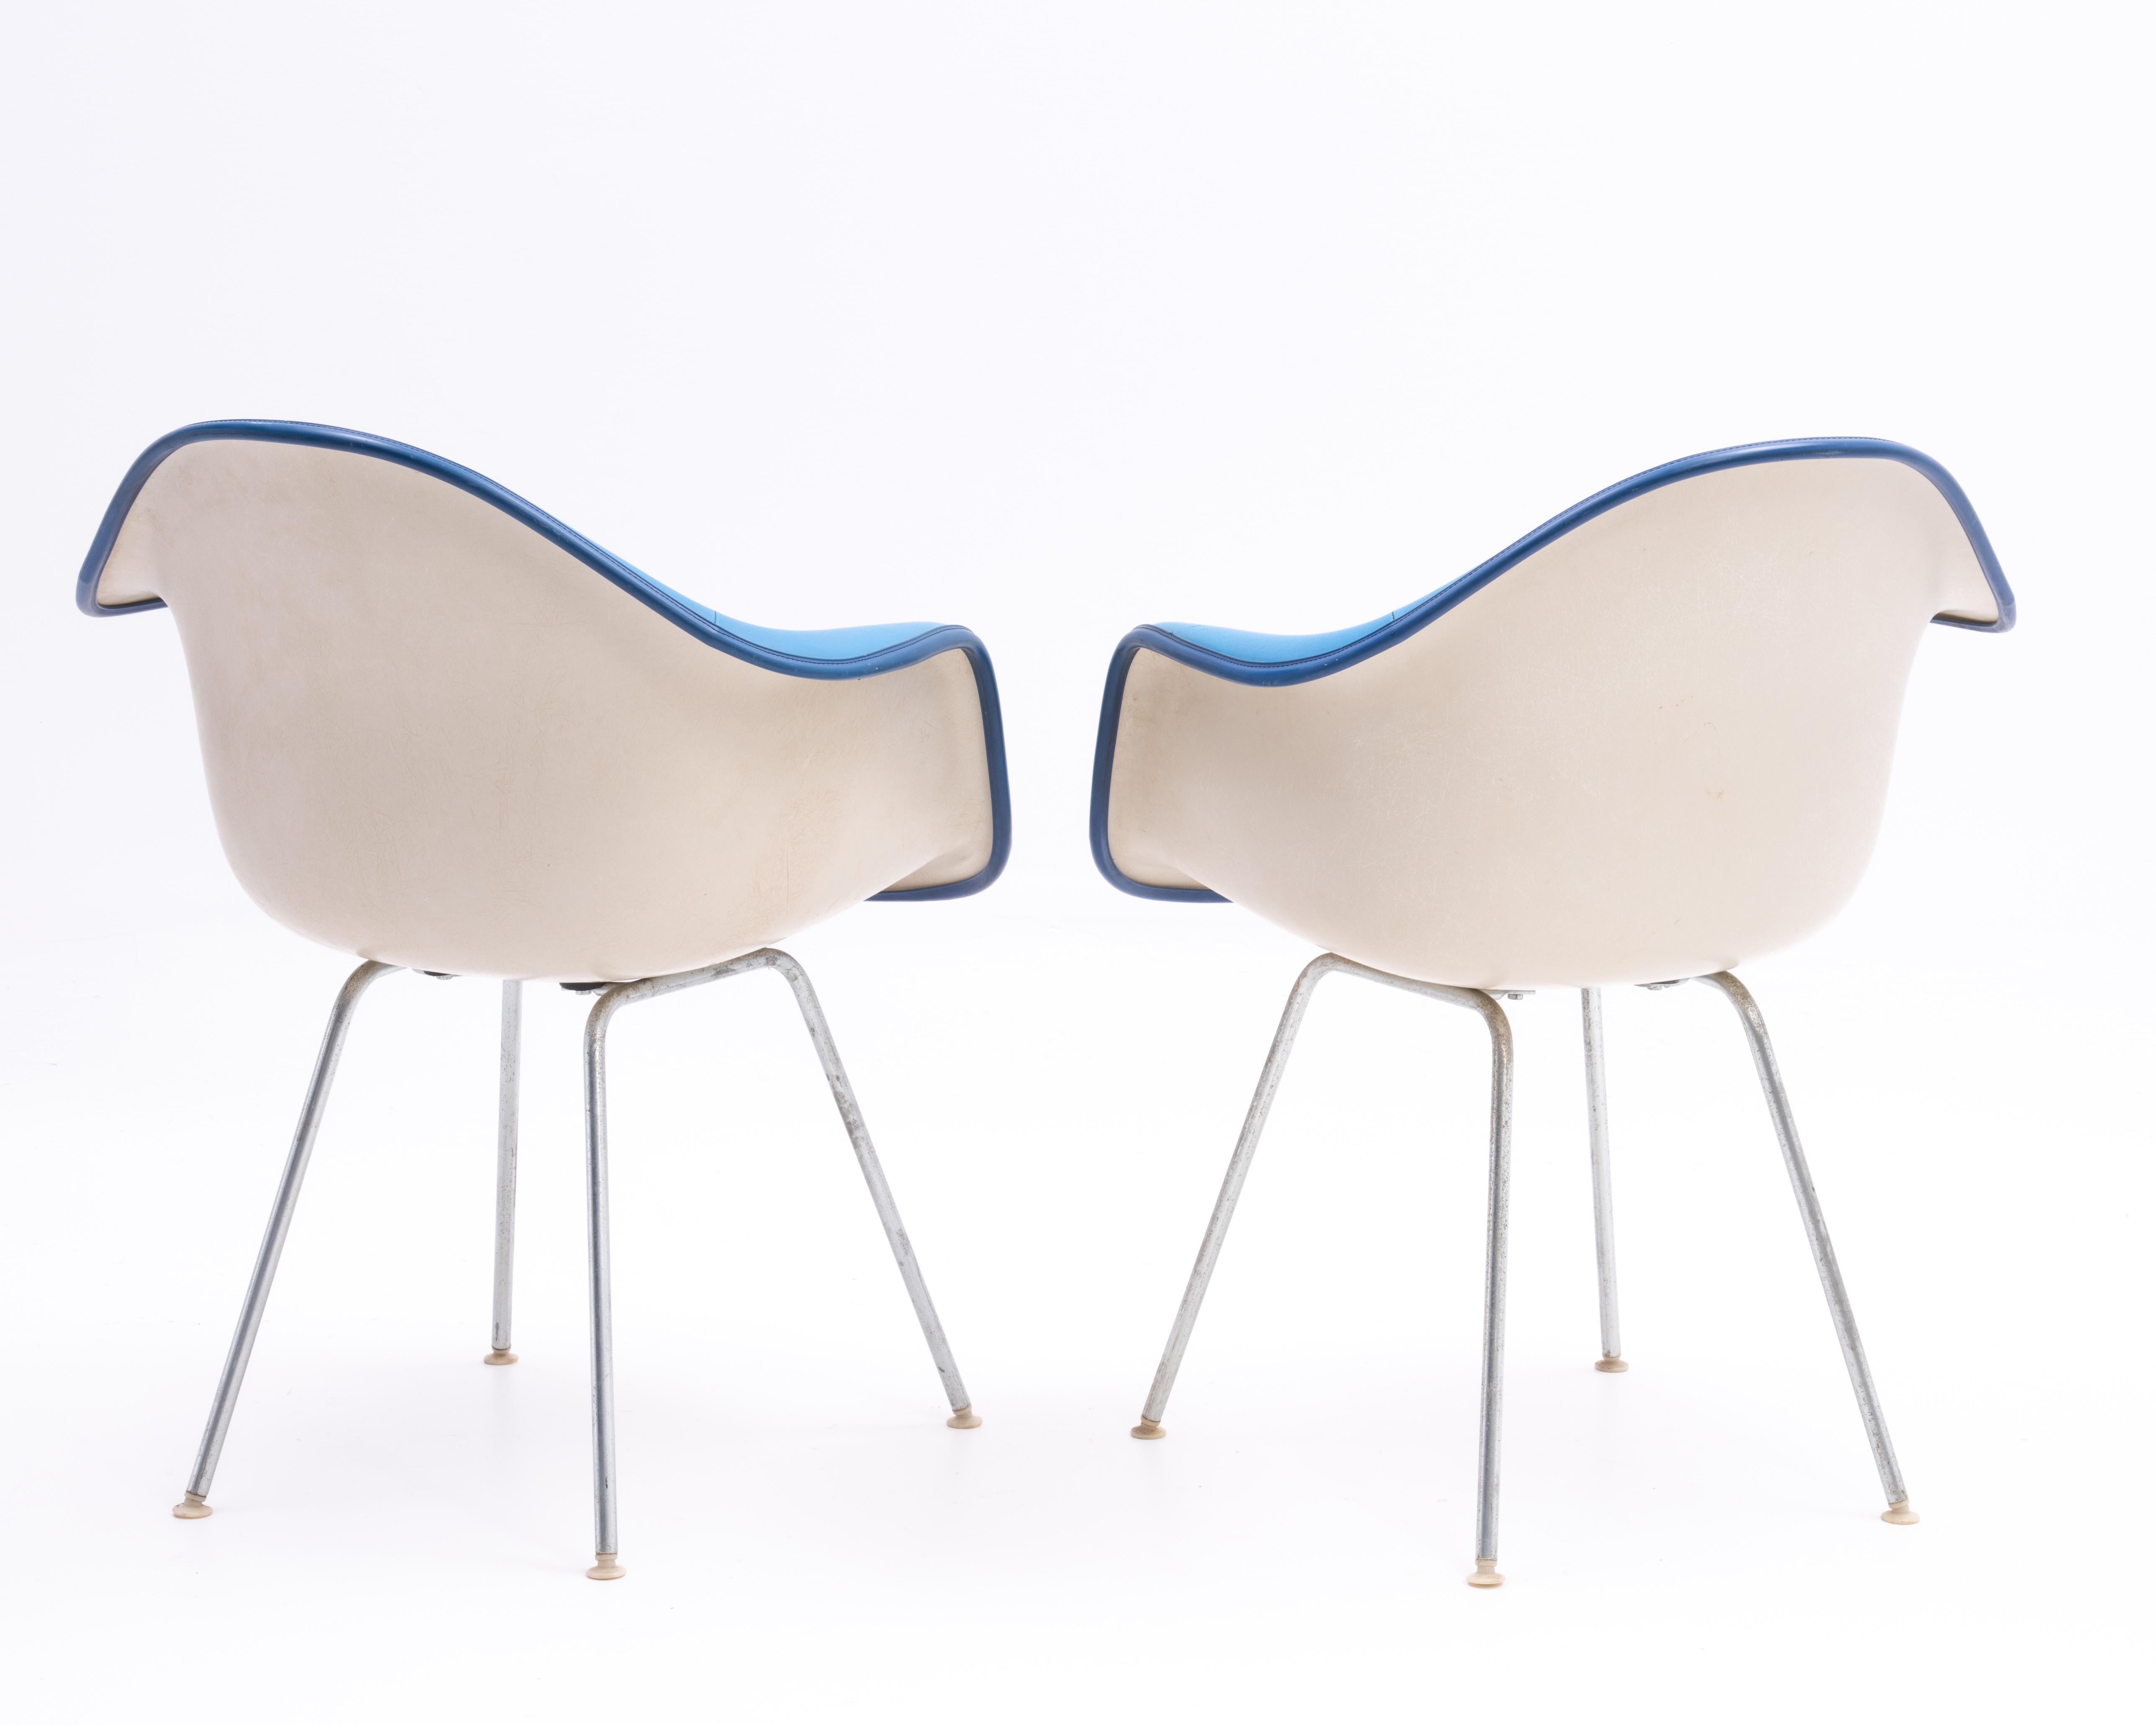 Aluminum Ray Charles Eames Herman Miller Padded Arm Shell Chairs Alexander Girard a Pair For Sale